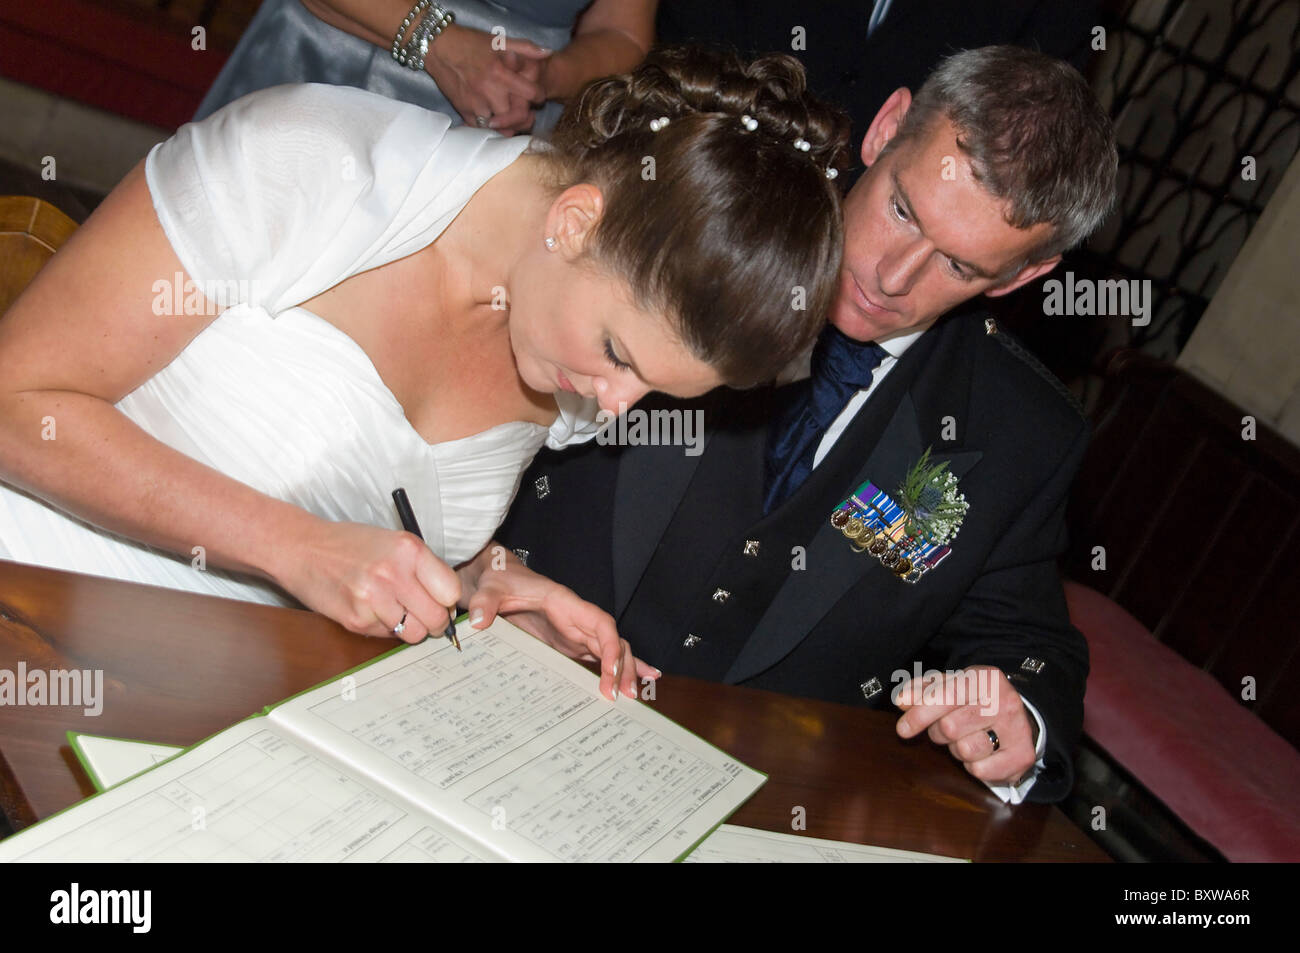 Horizontal close up portrait of a bride and groom signing the official register following their traditional church wedding. Stock Photo